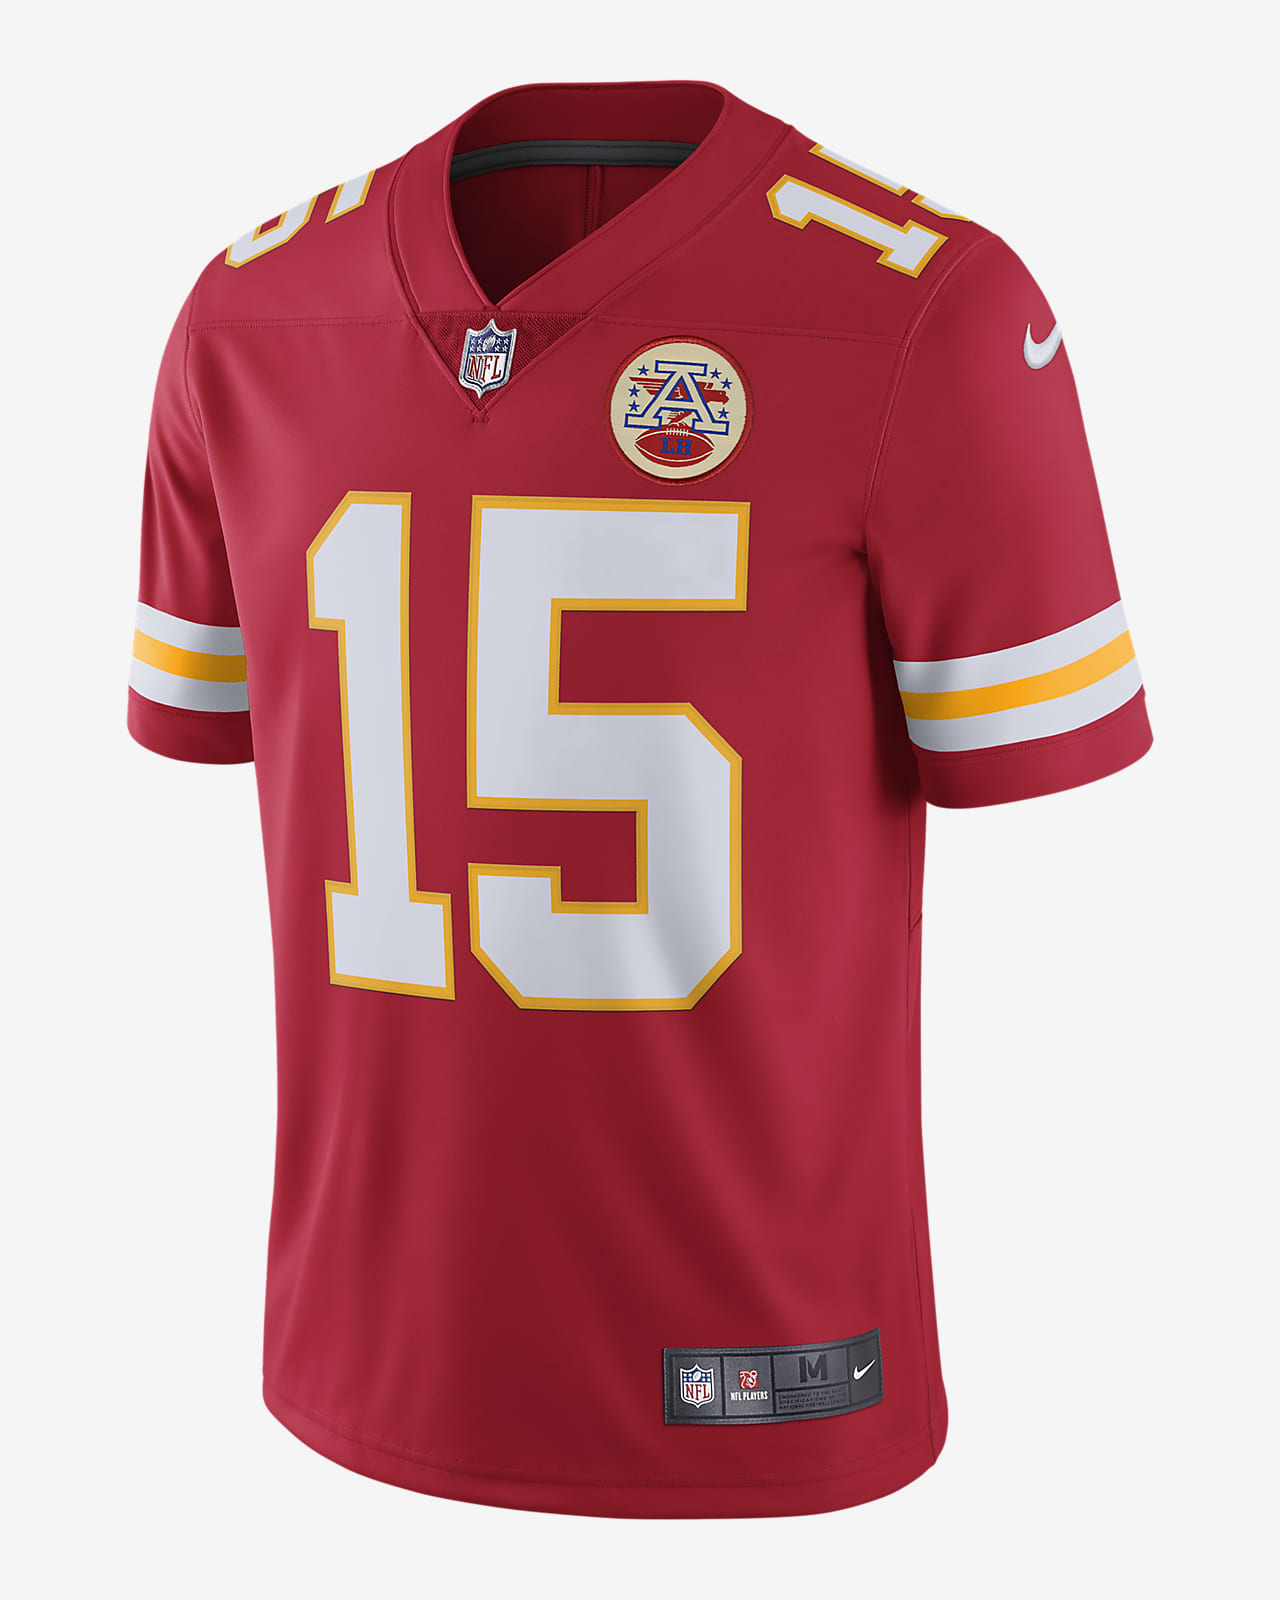 chiefs limited jersey